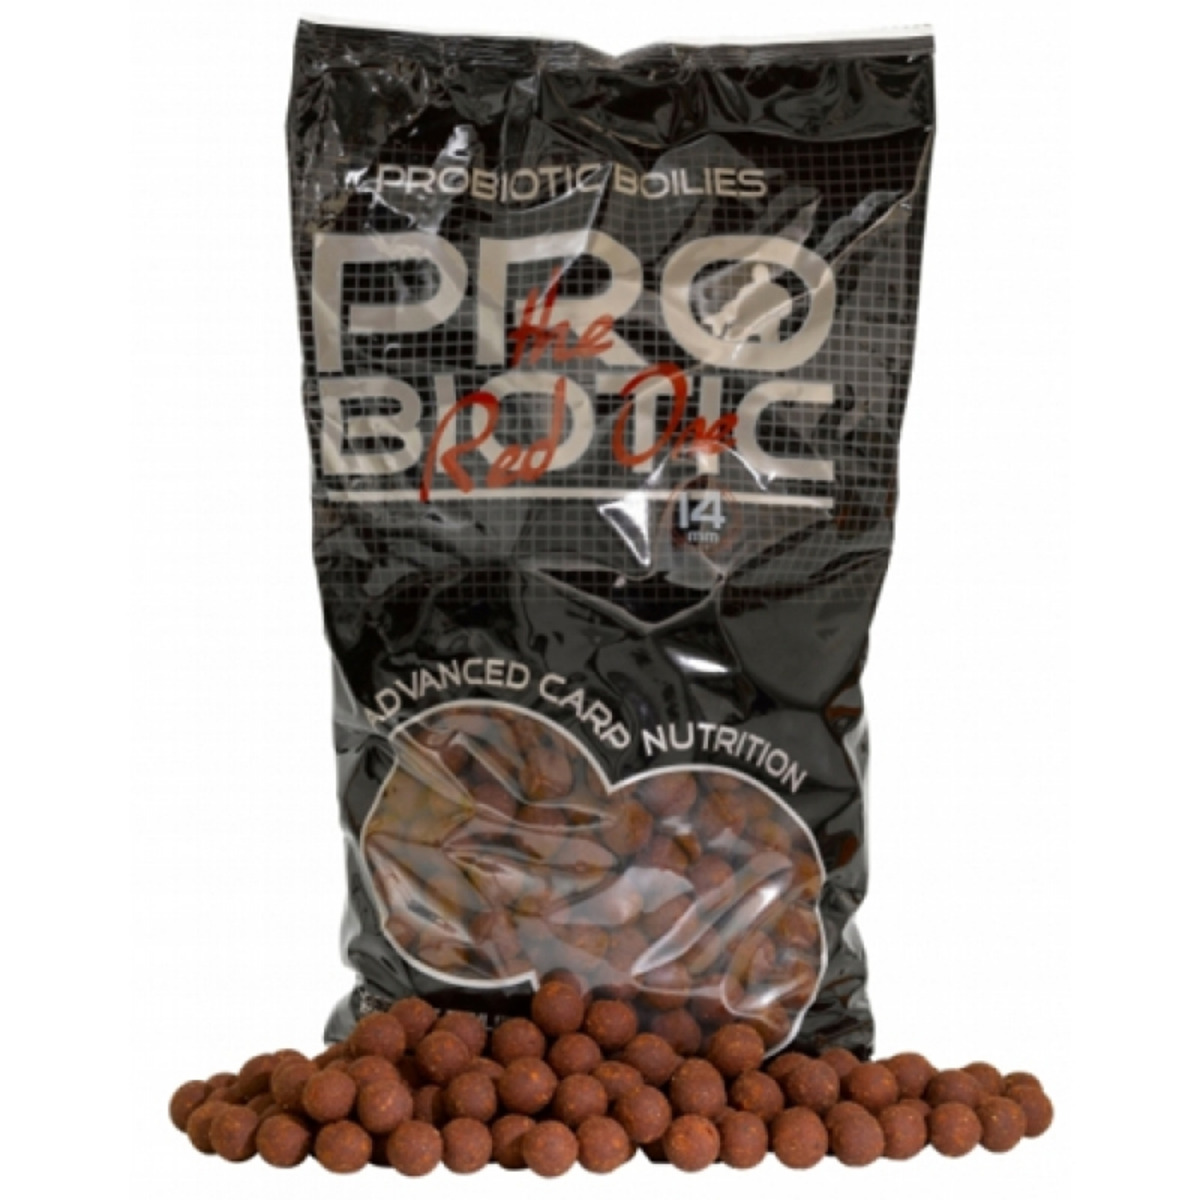 Starbaits Probiotic Boilies The Red One - 14 mm  - 2.5 kg